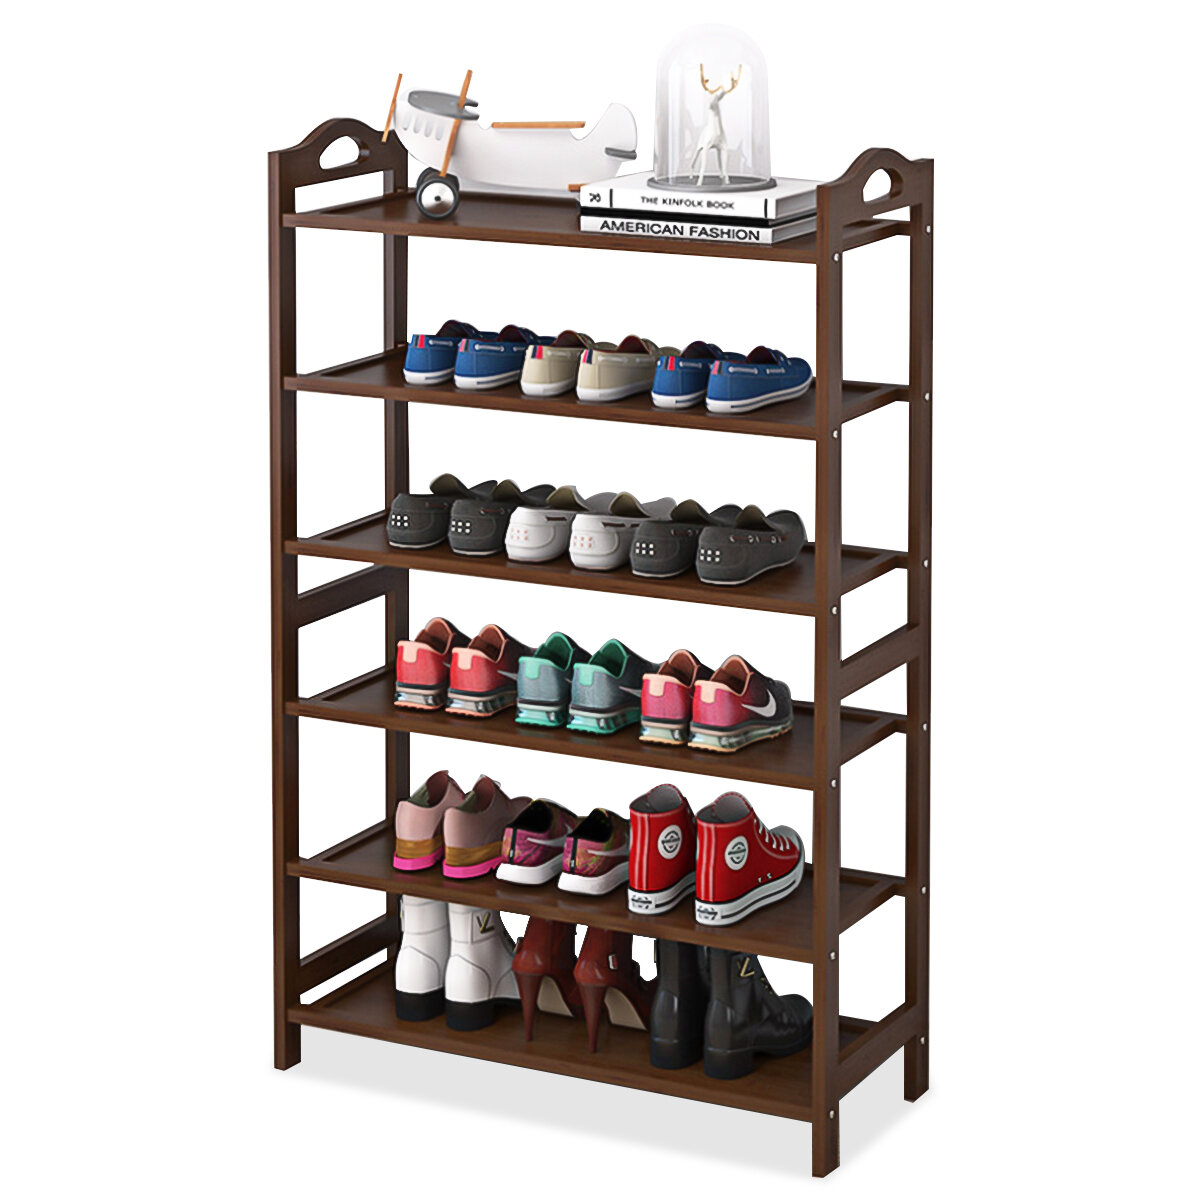 Image of 3/4/5/6 Tiers Shoe Rack Multi-layers Storage Shelf Space Saving Organizer Books Decorations Stand for Home Office